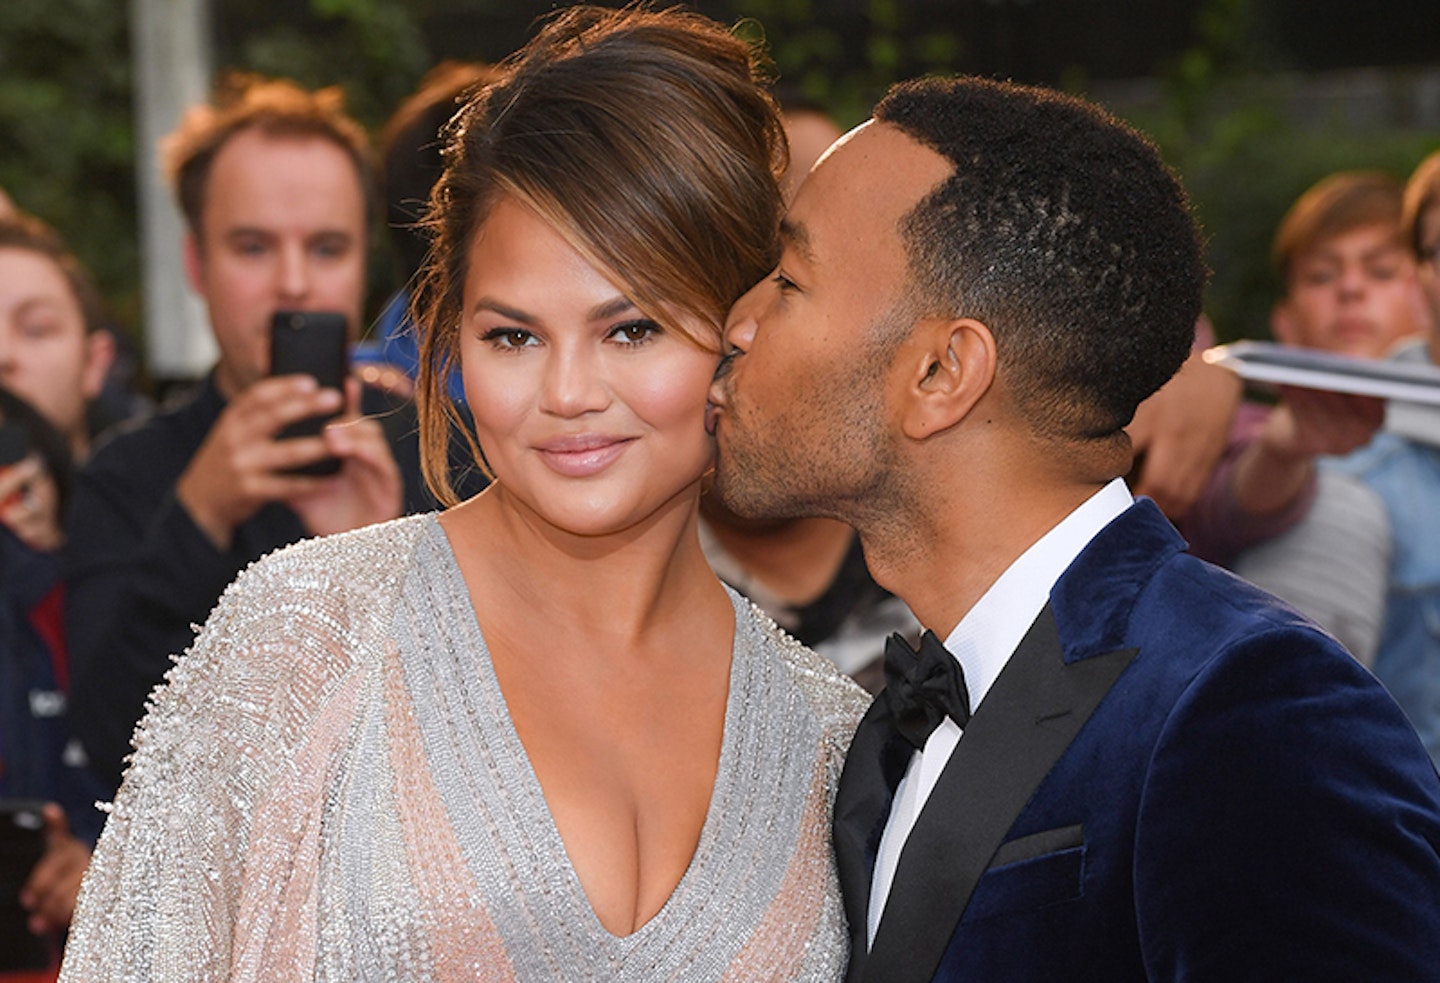 Chrissy Teigen just got real about her post-pregnancy sex life